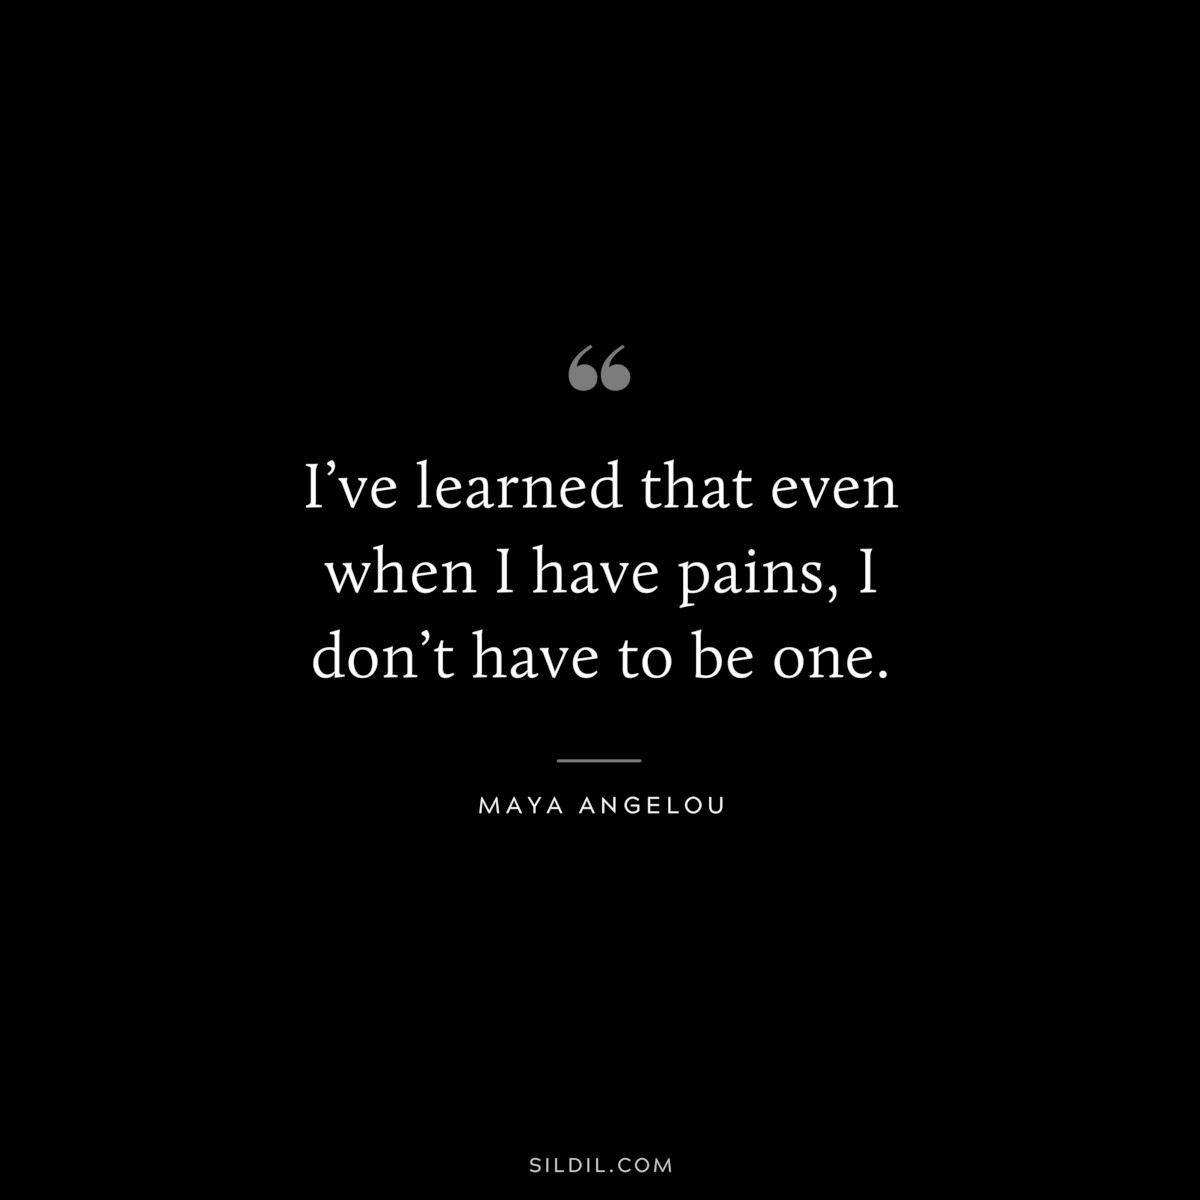 I’ve learned that even when I have pains, I don’t have to be one. ― Maya Angelou